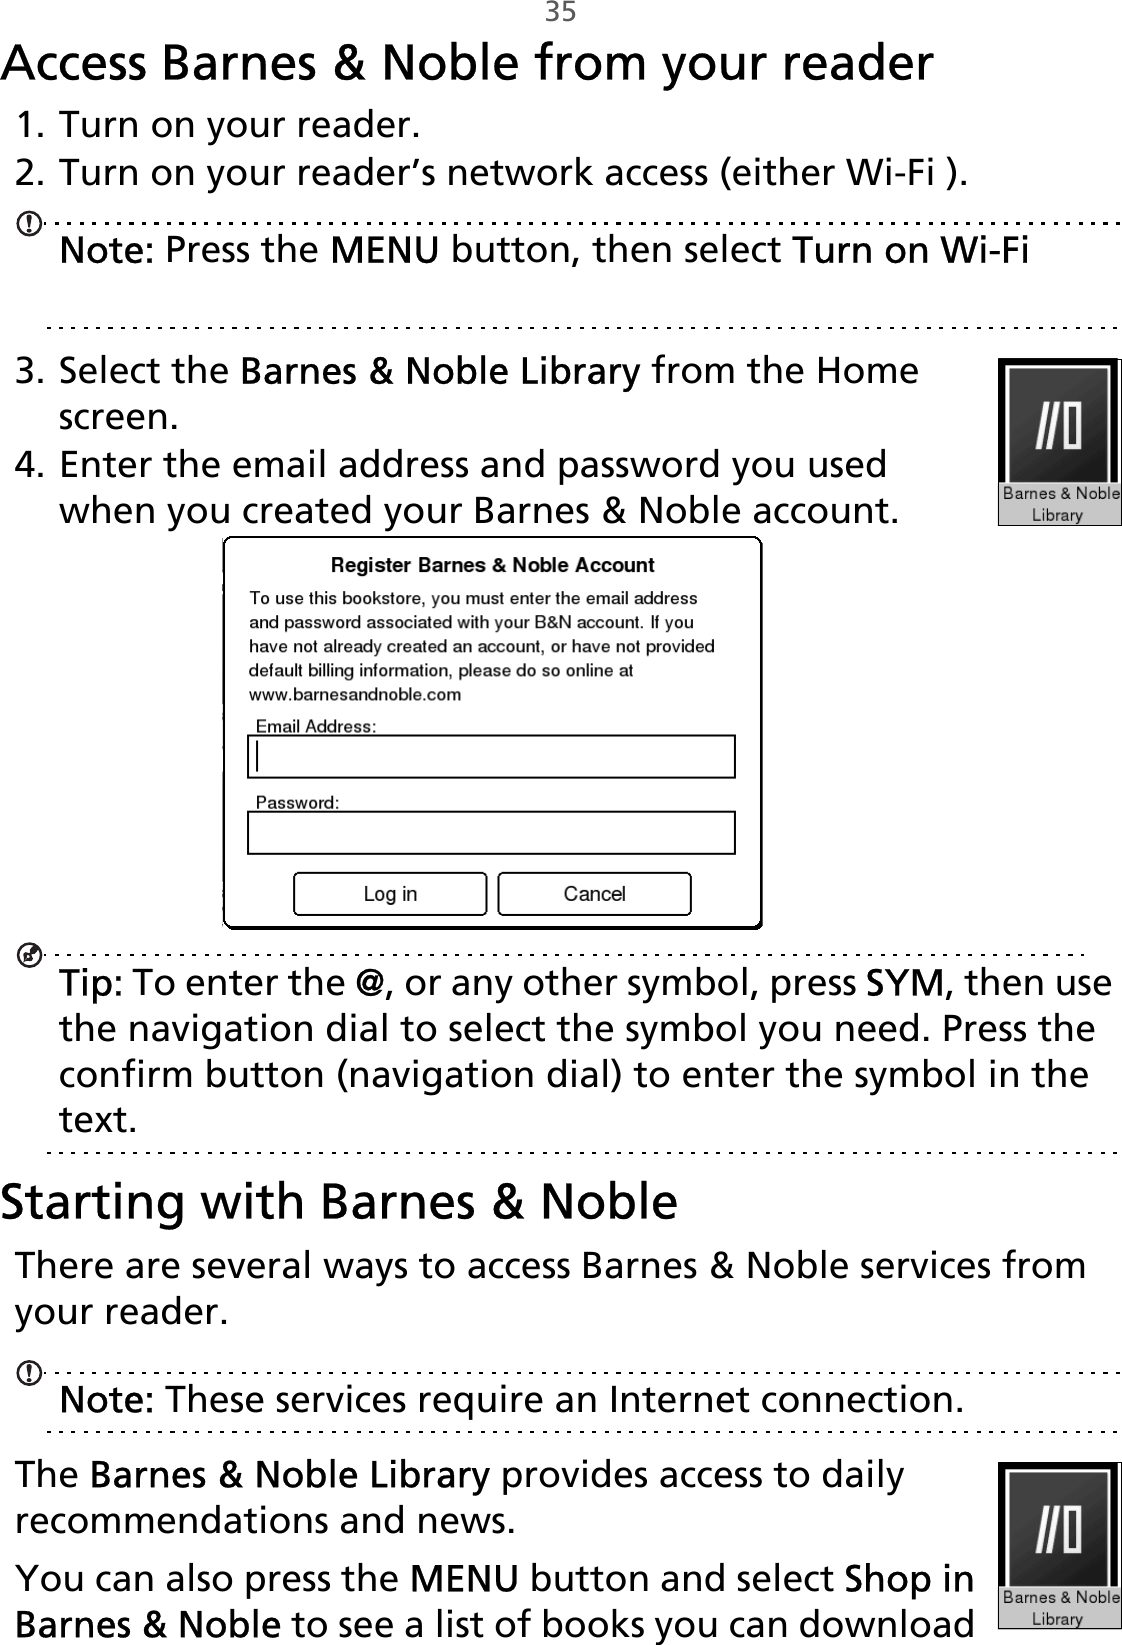 35Access Barnes &amp; Noble from your reader1. Turn on your reader.2. Turn on your reader’s network access (either Wi-Fi ).Note: Press the MENU button, then select Turn on Wi-Fi or Turn on 3G. See “Wi-Fi and 3G connections” on page 20.3. Select the Barnes &amp; Noble Library from the Home screen.4. Enter the email address and password you used when you created your Barnes &amp; Noble account.Tip: To enter the @, or any other symbol, press SYM, then use the navigation dial to select the symbol you need. Press the confirm button (navigation dial) to enter the symbol in the text.Starting with Barnes &amp; NobleThere are several ways to access Barnes &amp; Noble services from your reader. Note: These services require an Internet connection.The Barnes &amp; Noble Library provides access to daily recommendations and news.You can also press the MENU button and select Shop in Barnes &amp; Noble to see a list of books you can download 